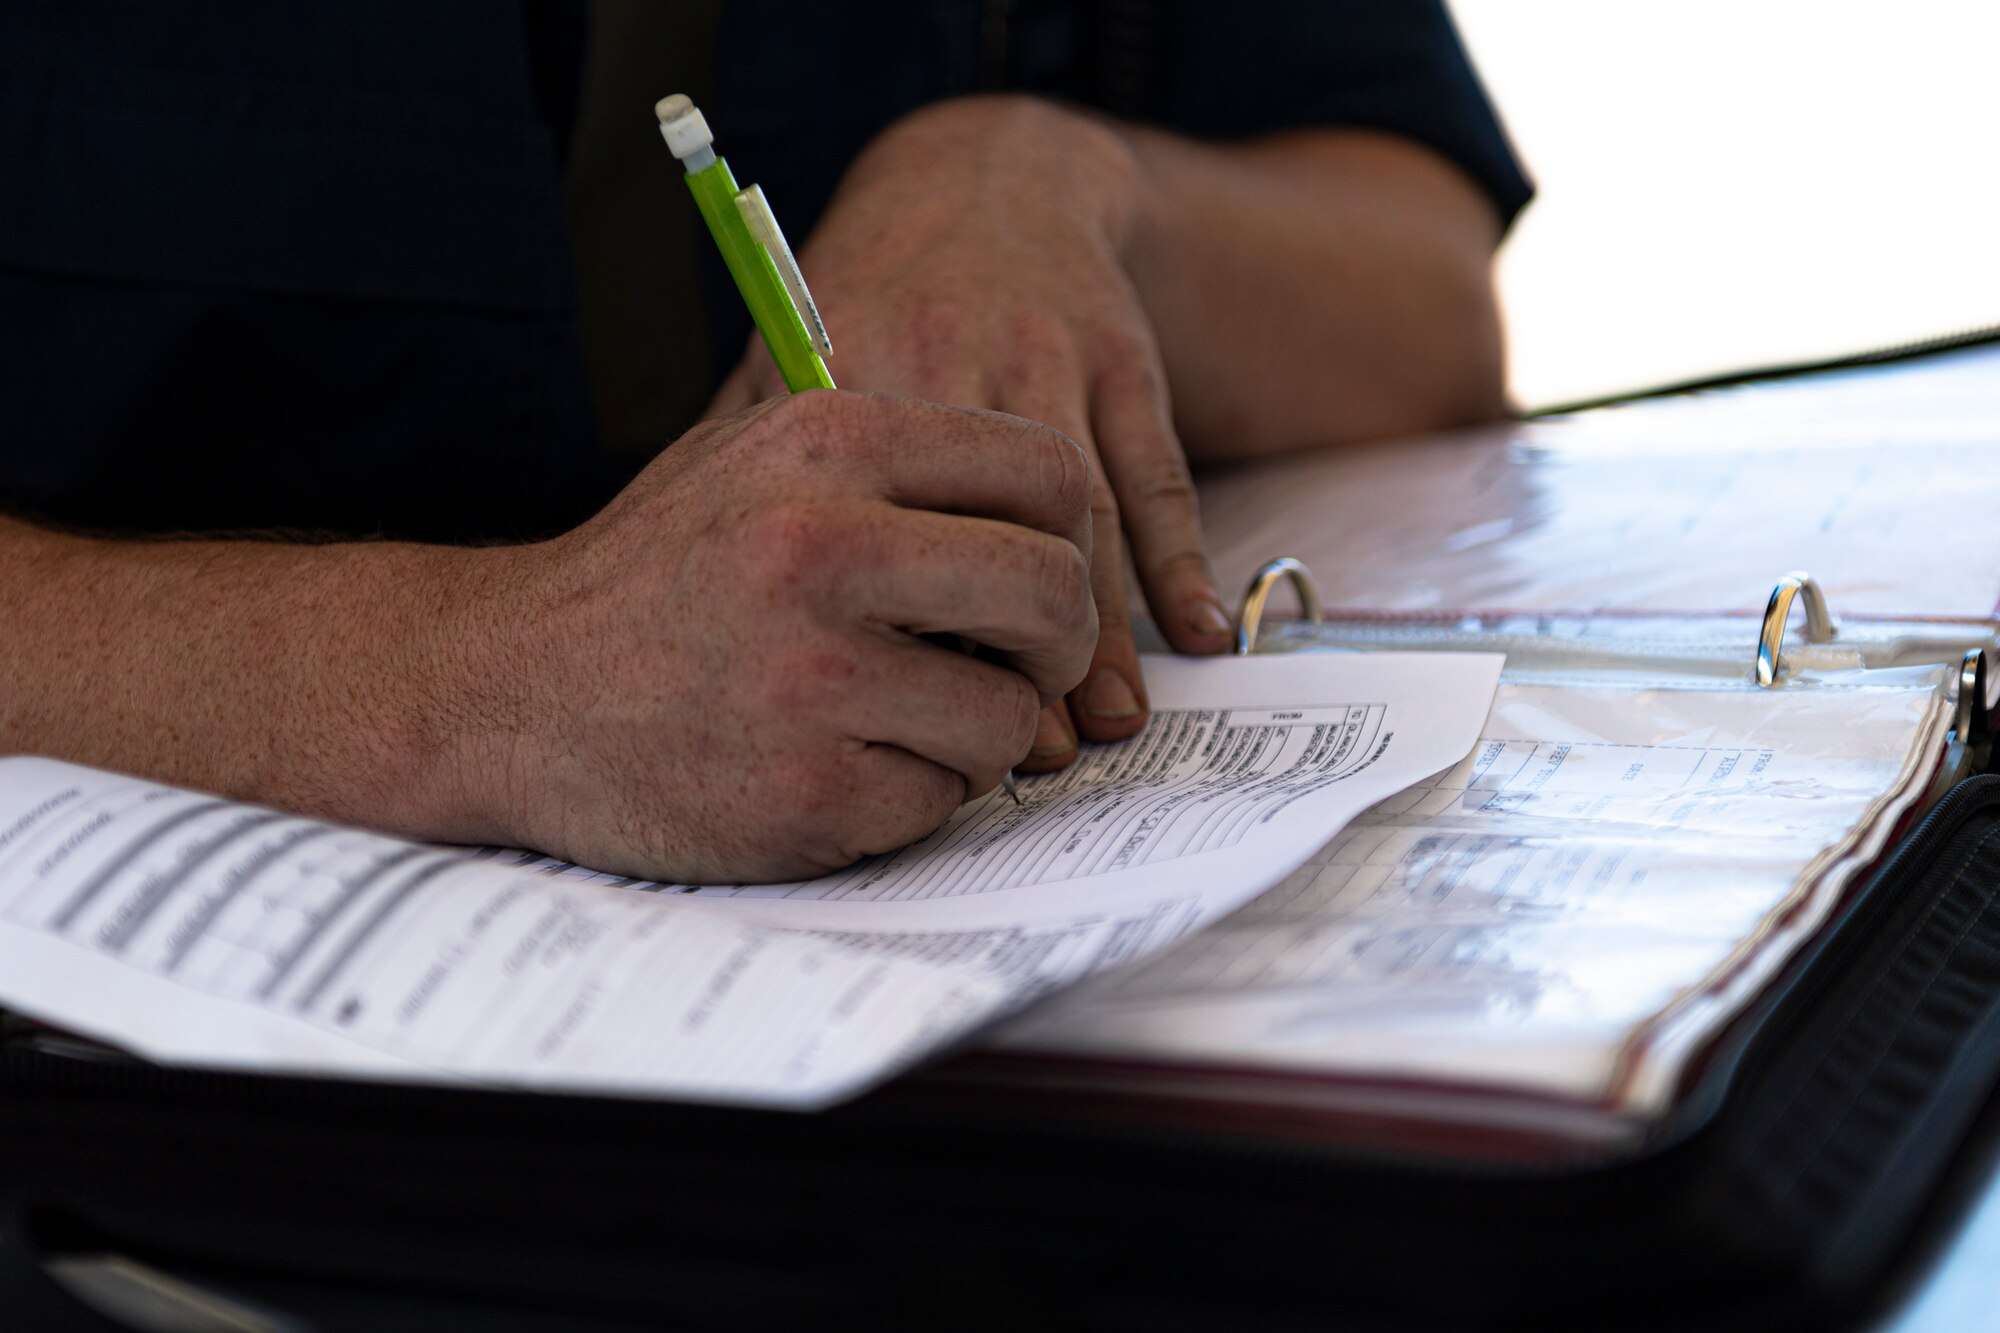 A photo of an Airman filling out paperwork